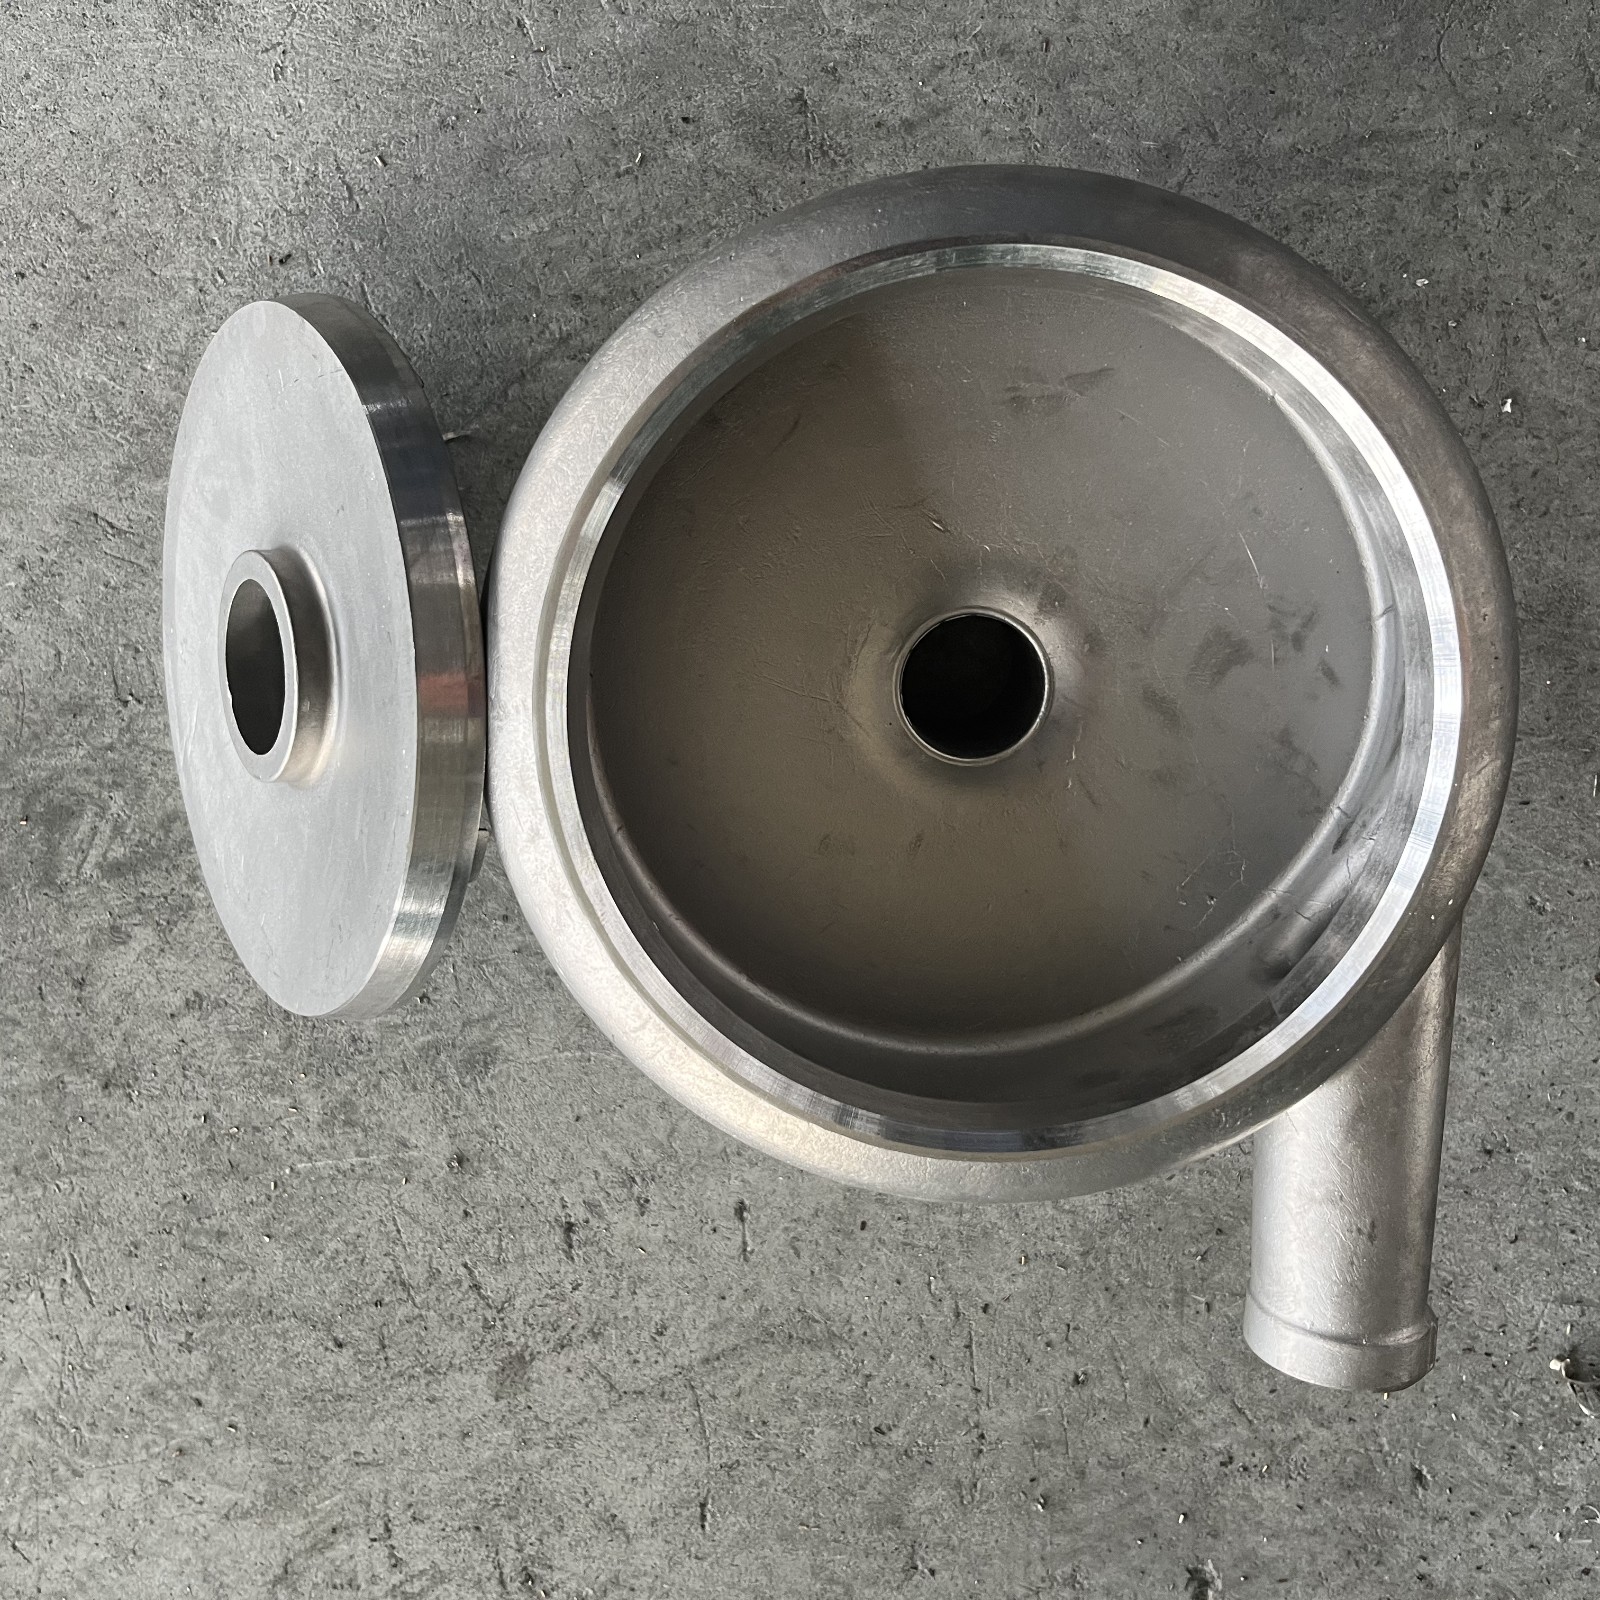 Two-phase steel pump parts